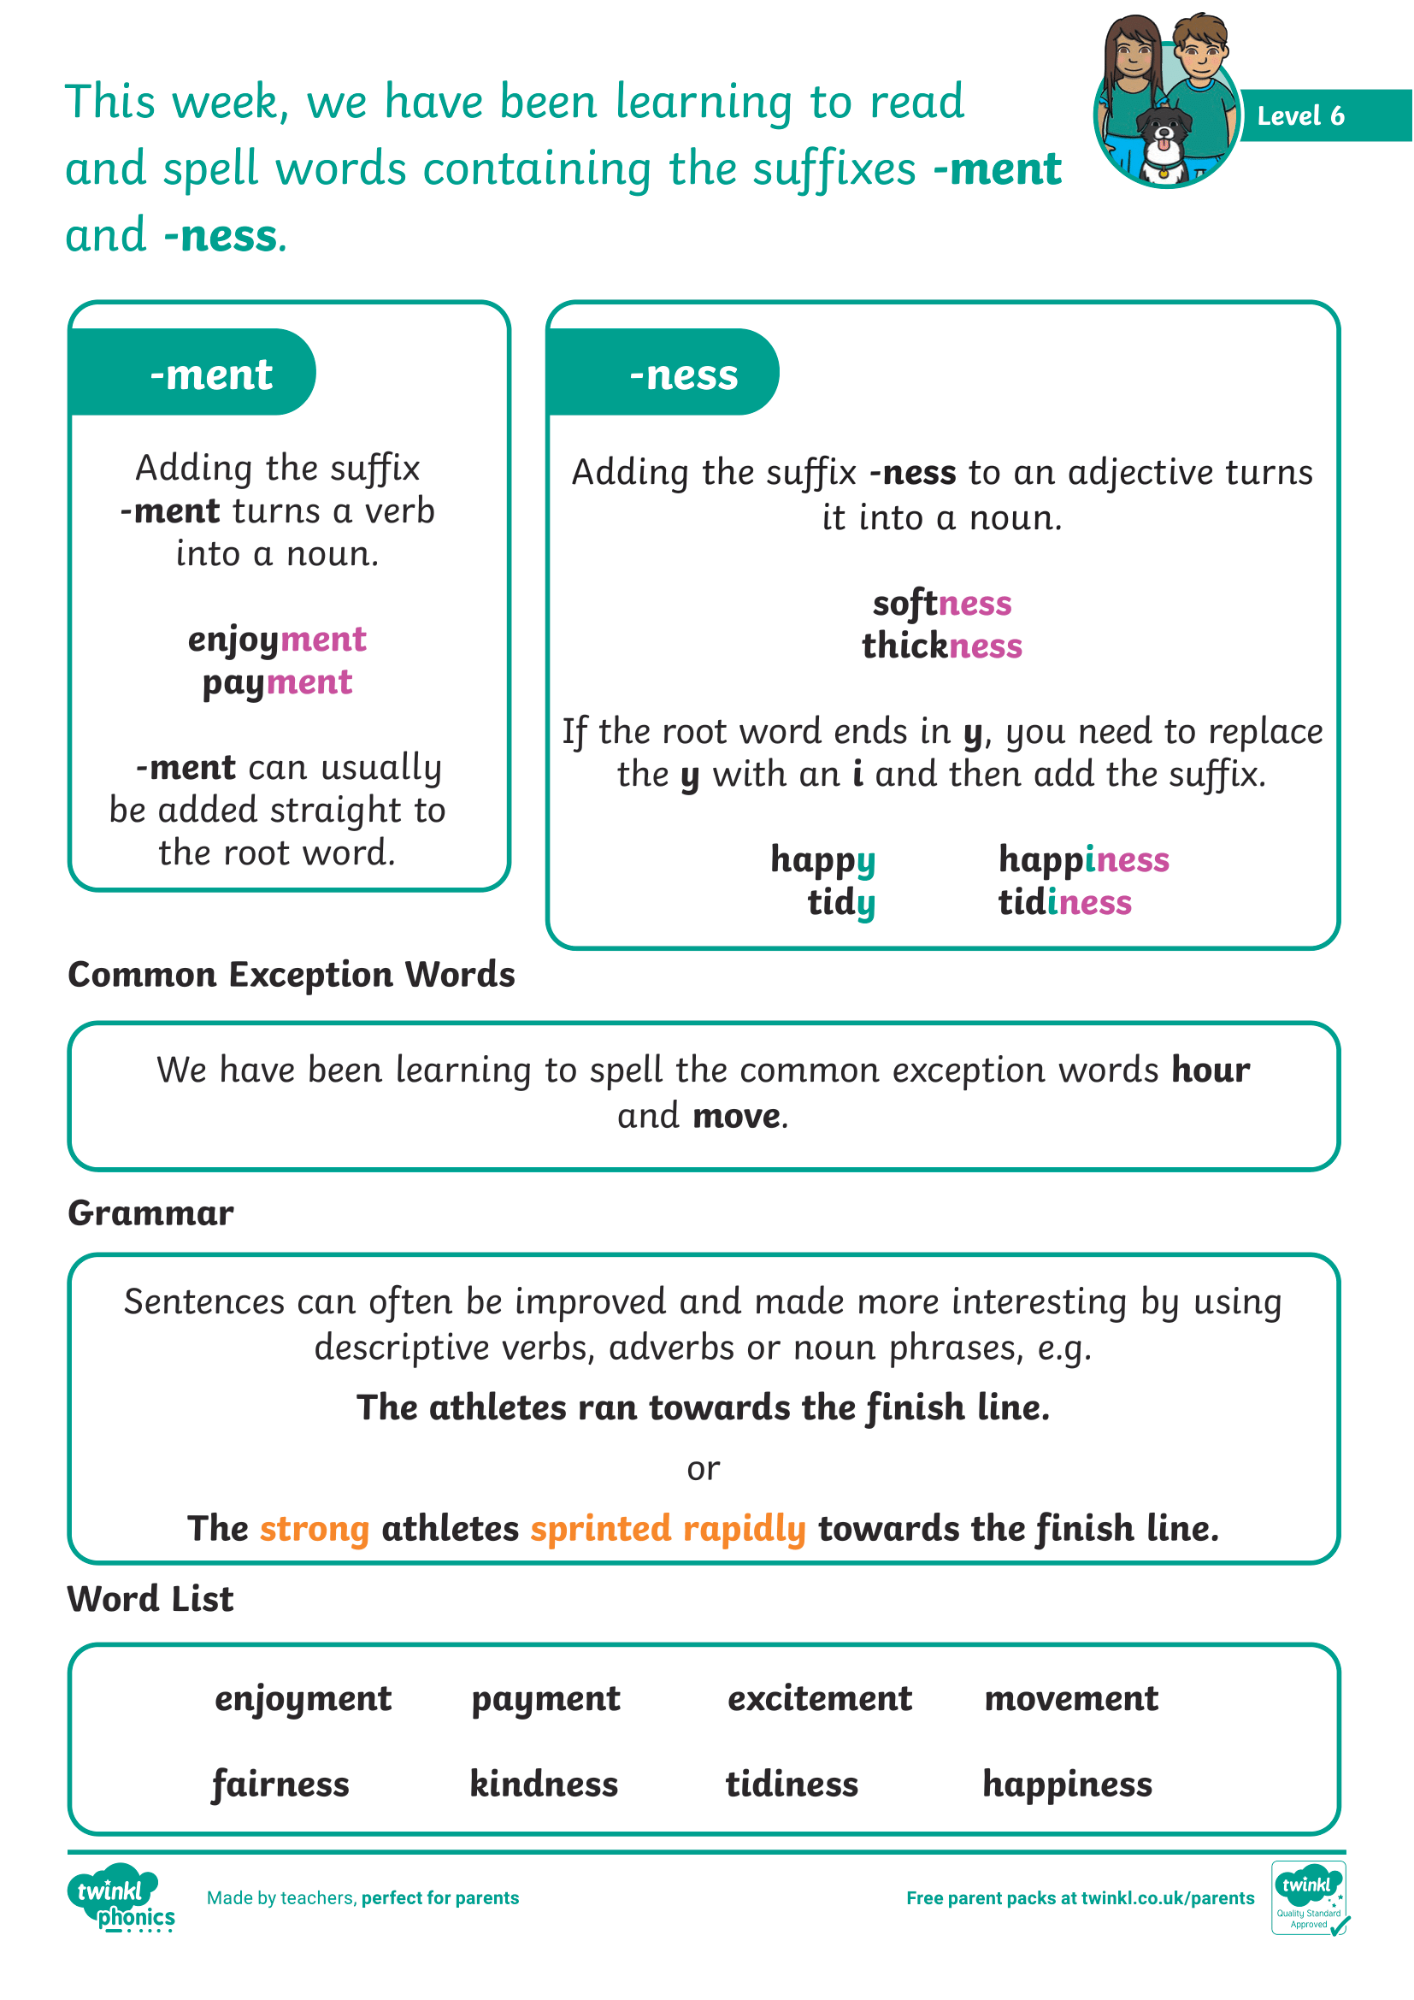 Image of Phonics Level 6 - Week 24 - suffixes '-ment', '-ness'.